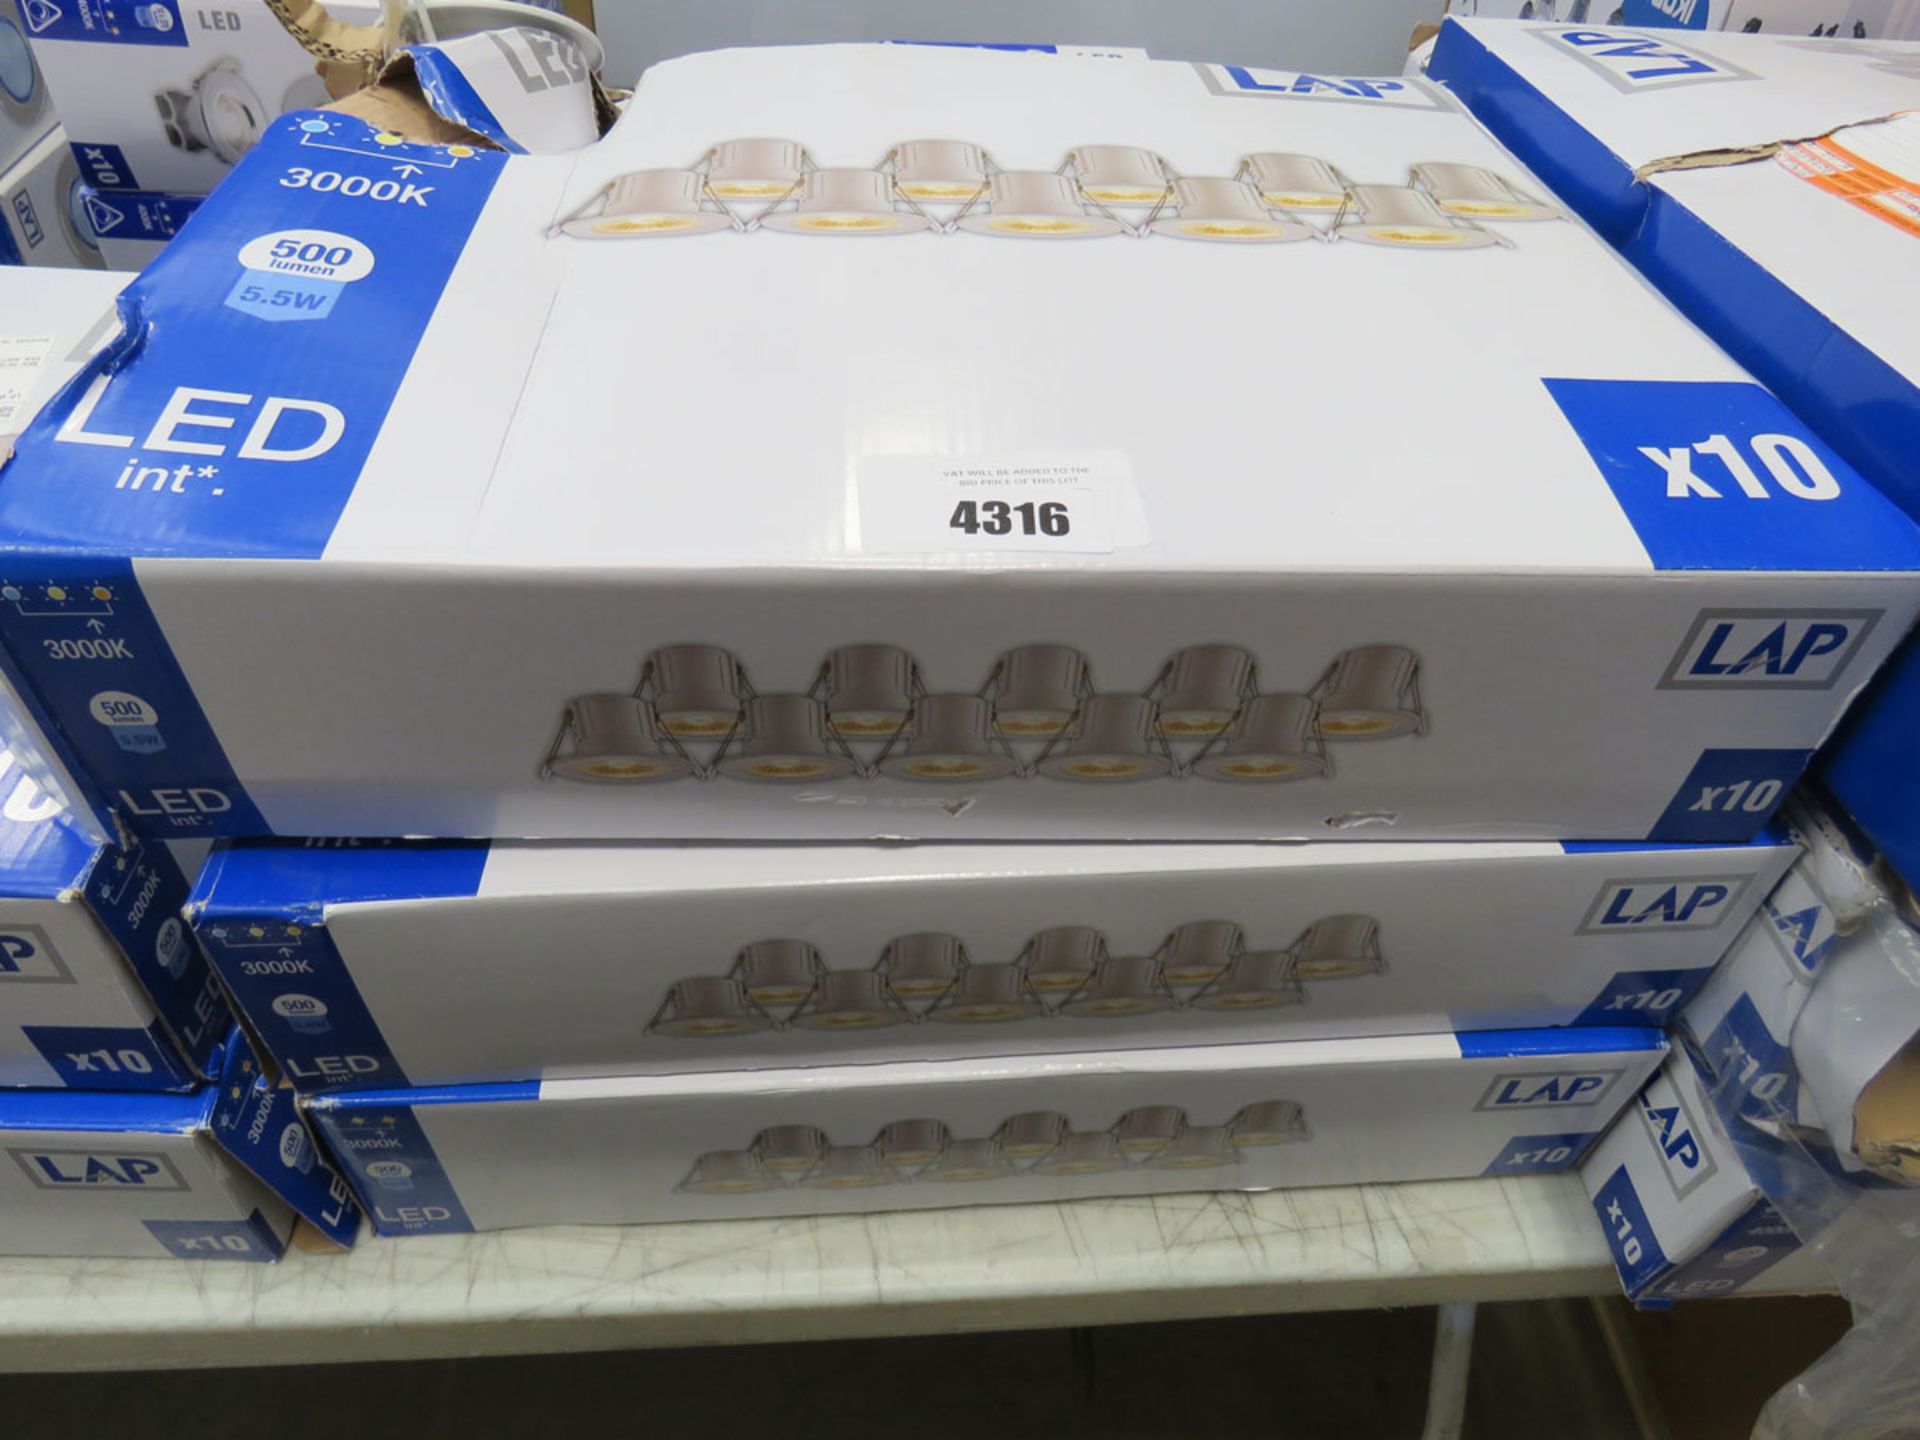 3 boxes of LAP LED downlights